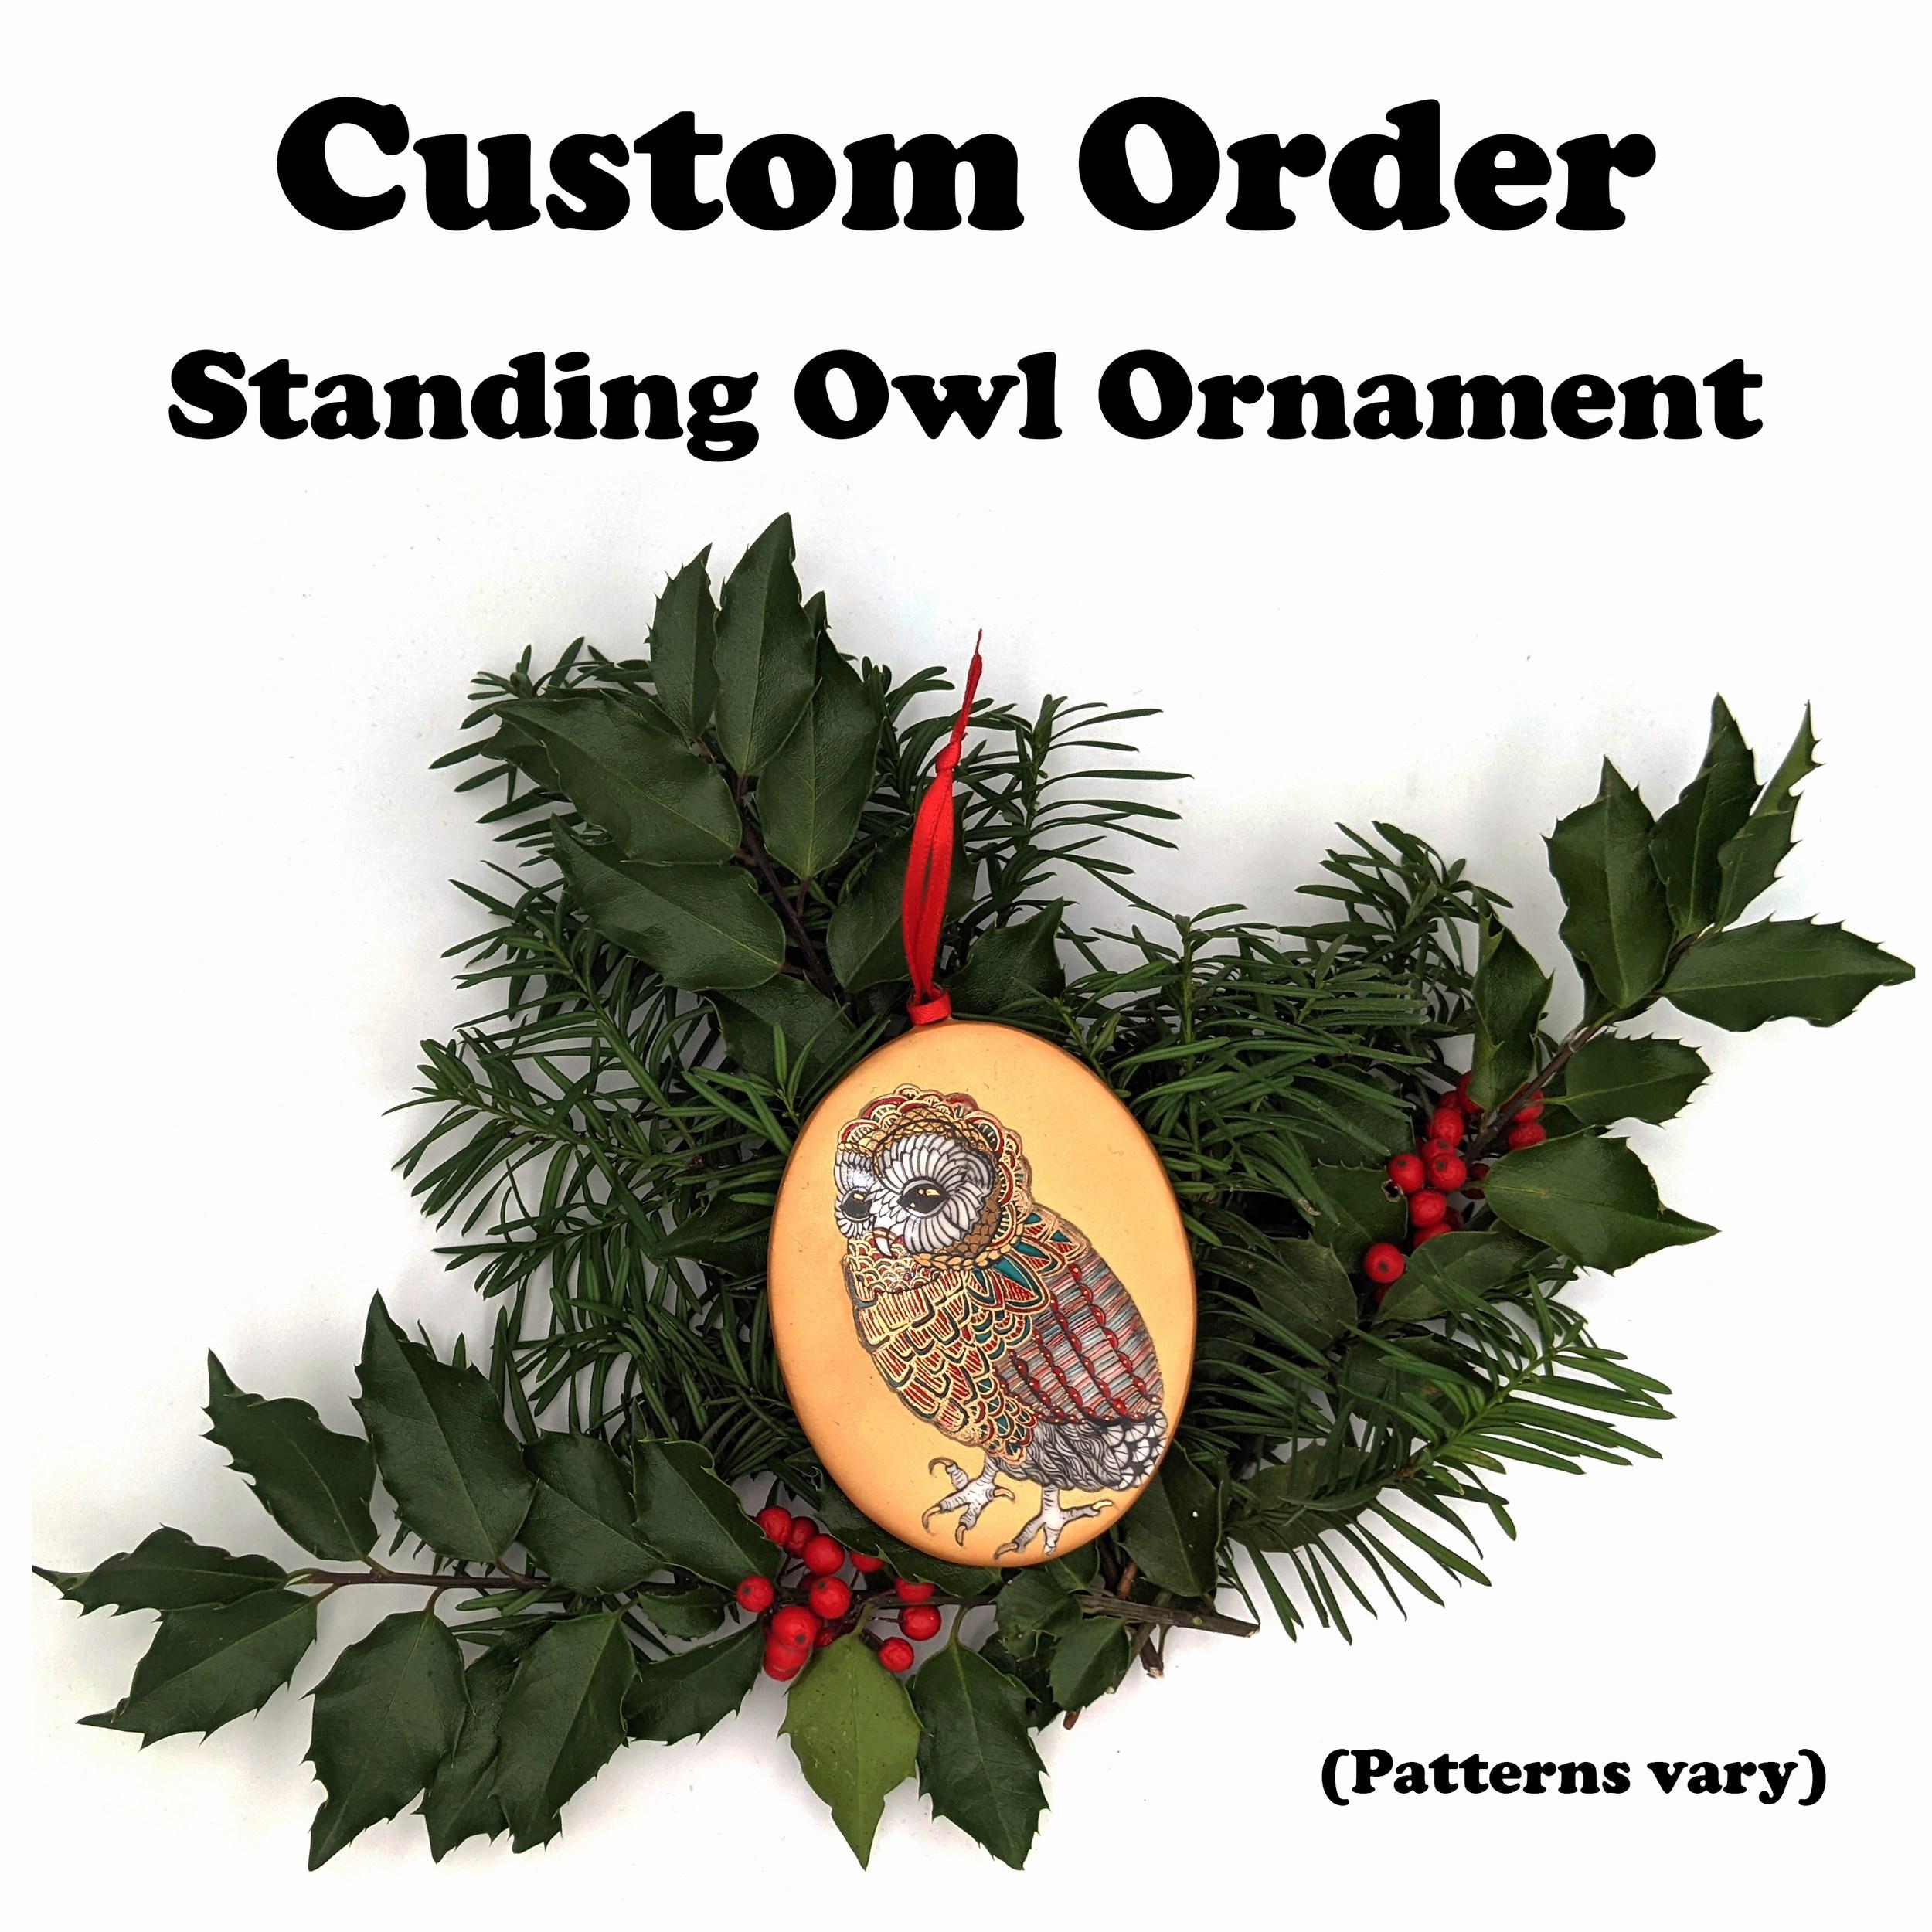 Ornament  Owl (Medium) (MADE TO ORDER) (Hand-painted, hand-made, porcelain) - Contemporary Sculpture by Melanie Sherman